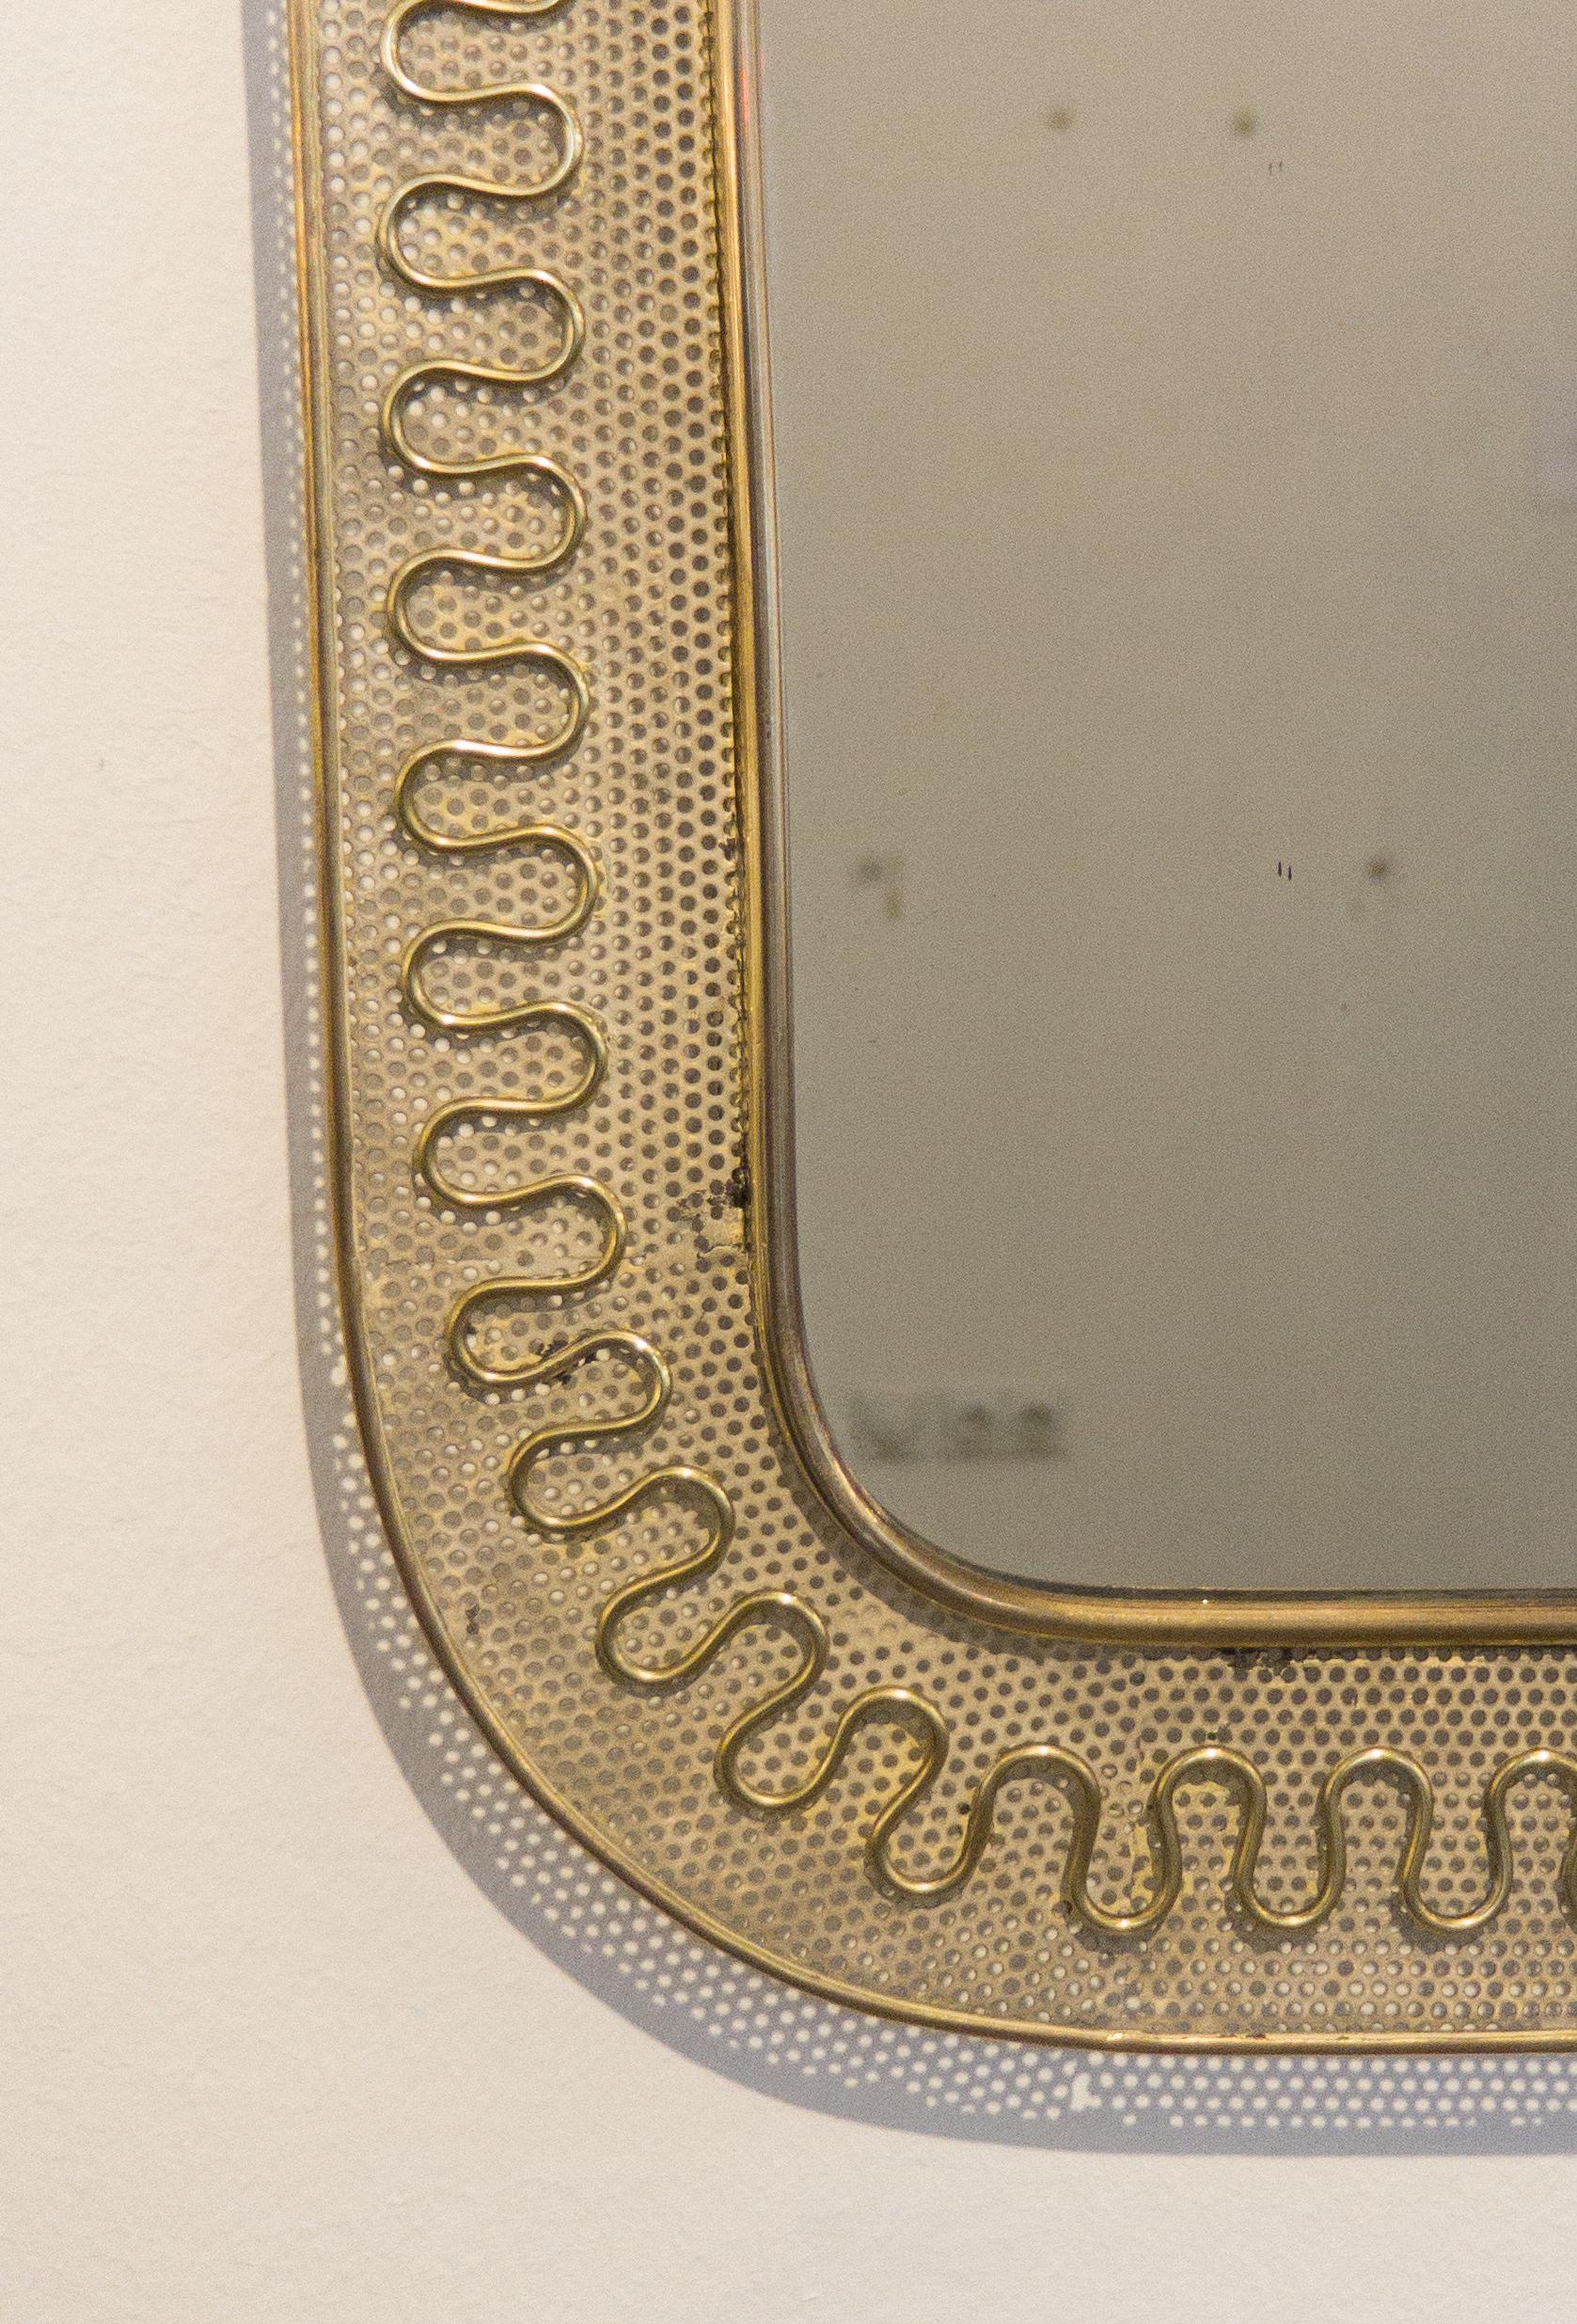 20th Century Italian Midcentury Design Wall Mirror by Cesare Lacca made from Brass, 1950s For Sale